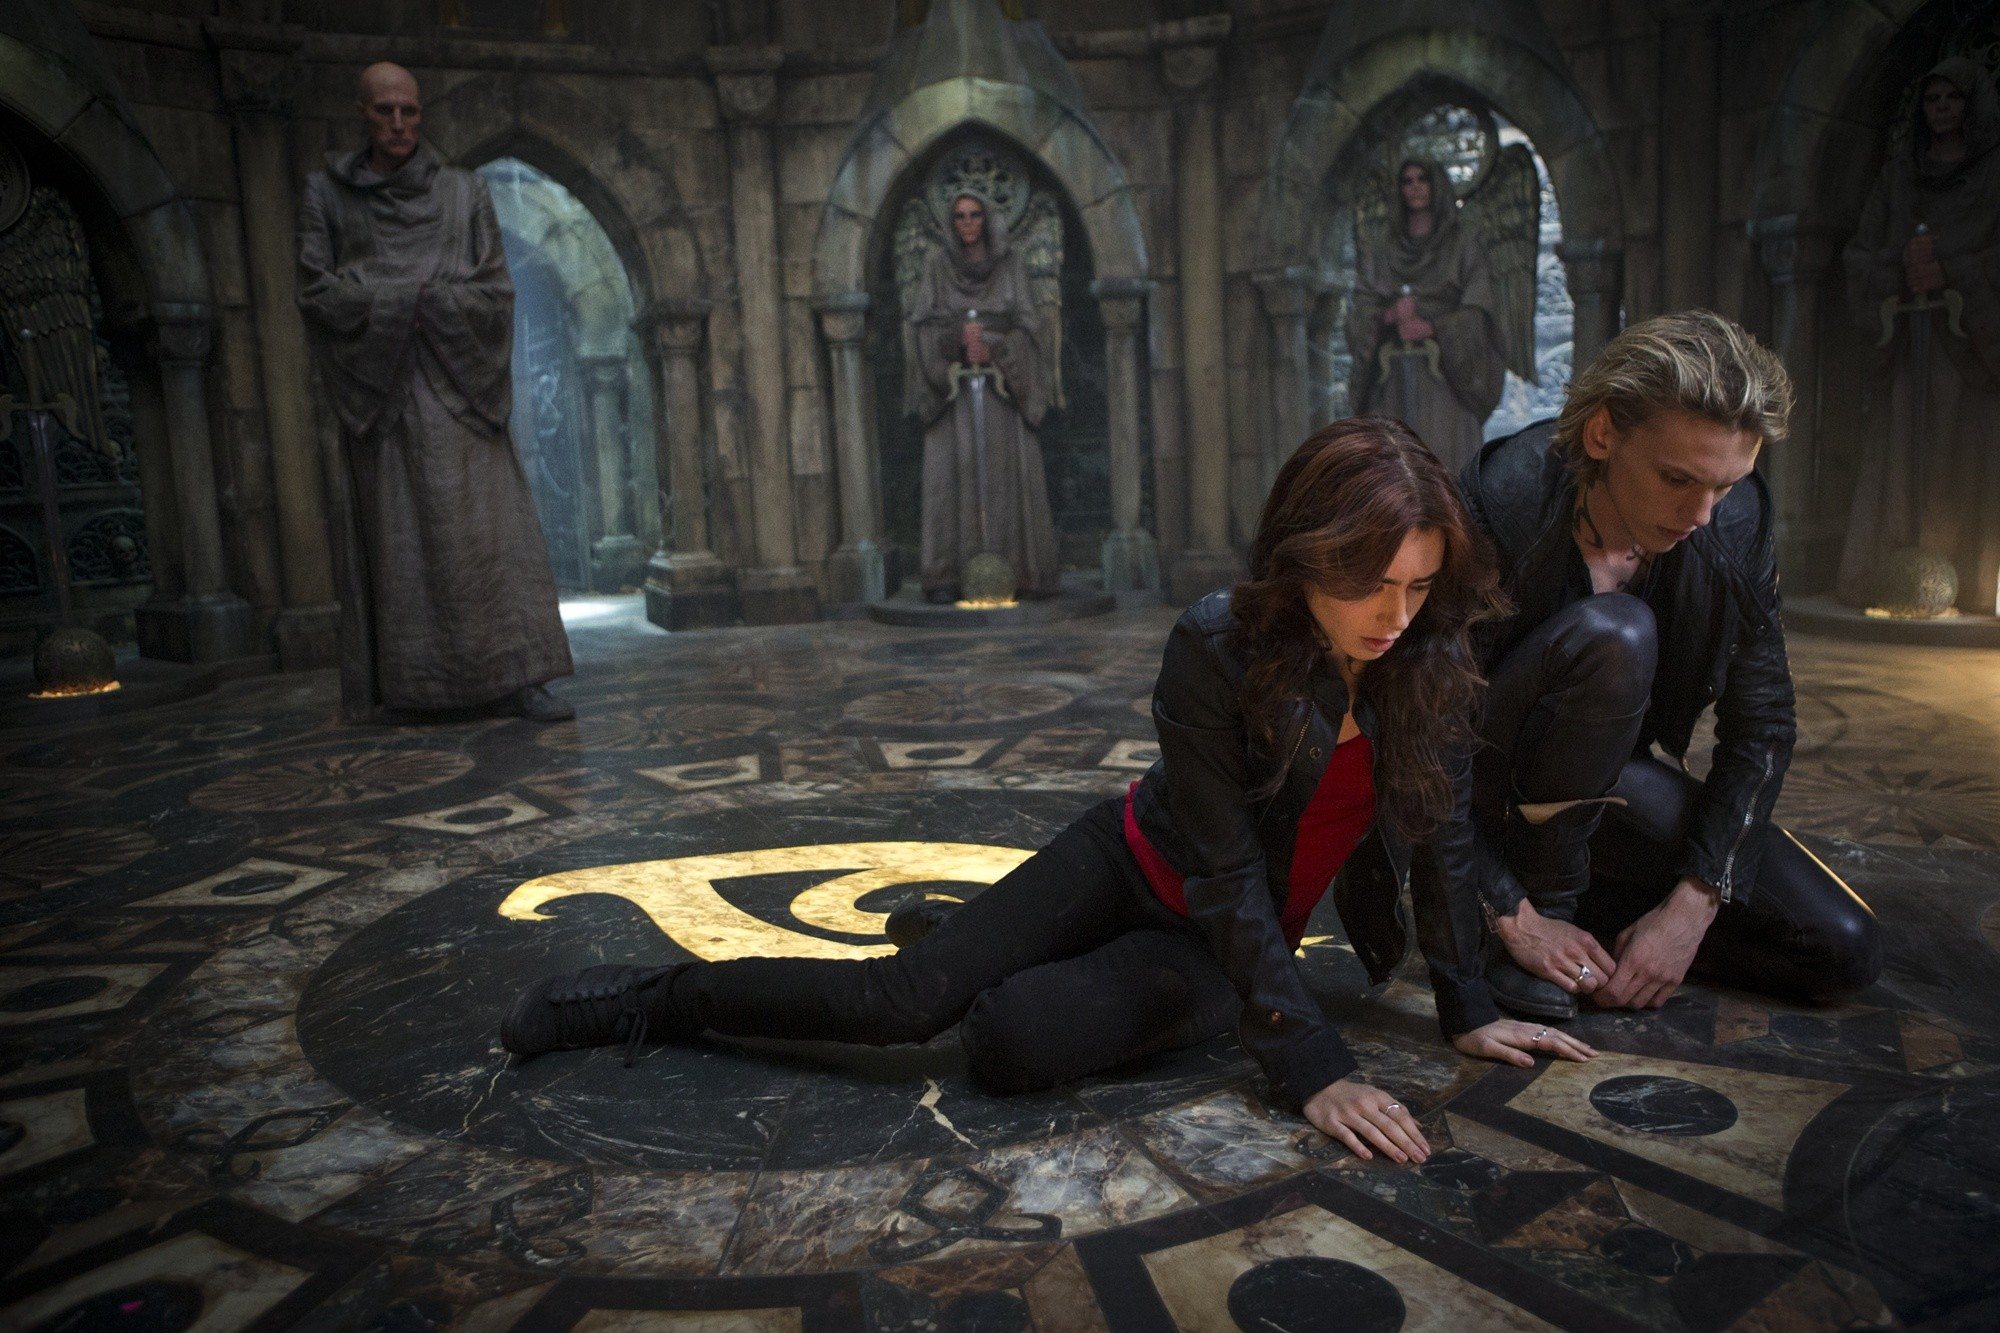 Lily Collins stars as Clary Fray and Jamie Campbell Bower stars as Jace Wayland in Screen Gems' The Mortal Instruments: City of Bones (2013). Photo credit by Rafy.